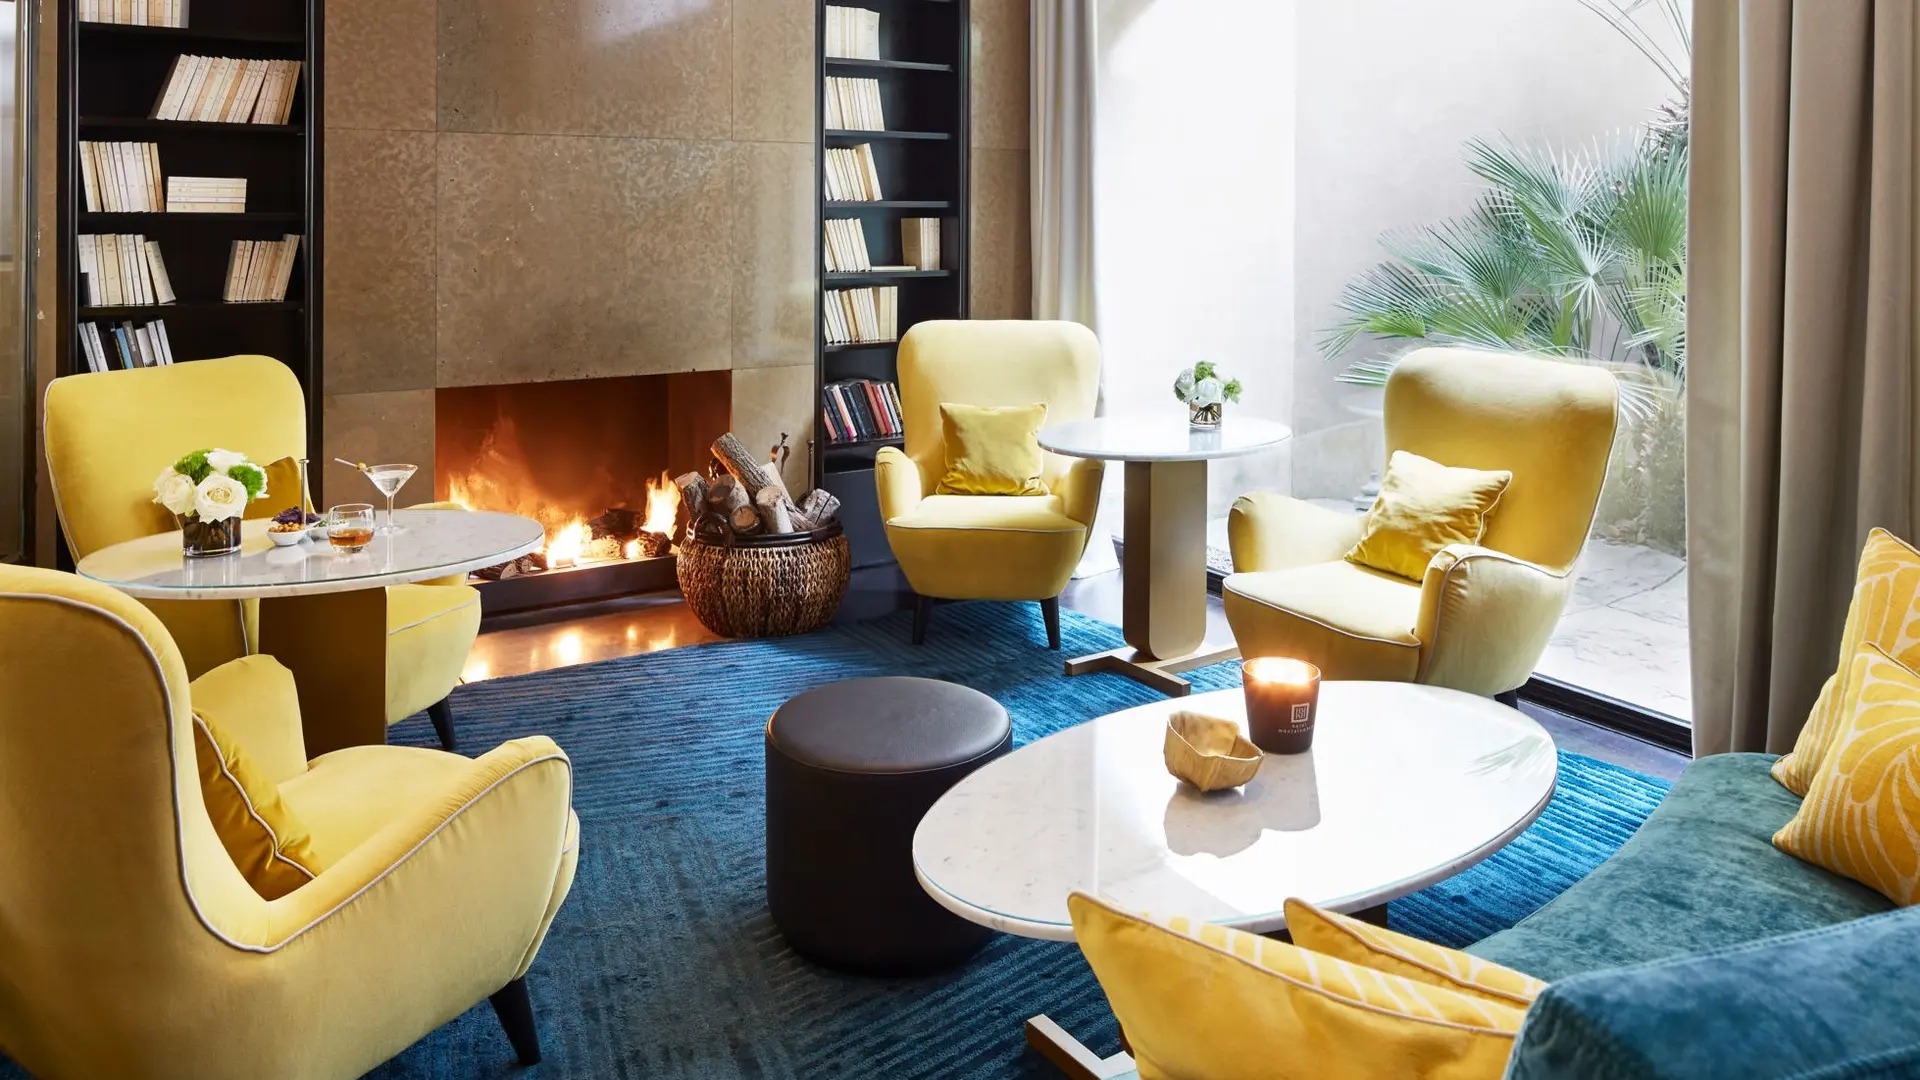 Relaxing area with yellow furniture and a fireplace at hotel montalembert paris